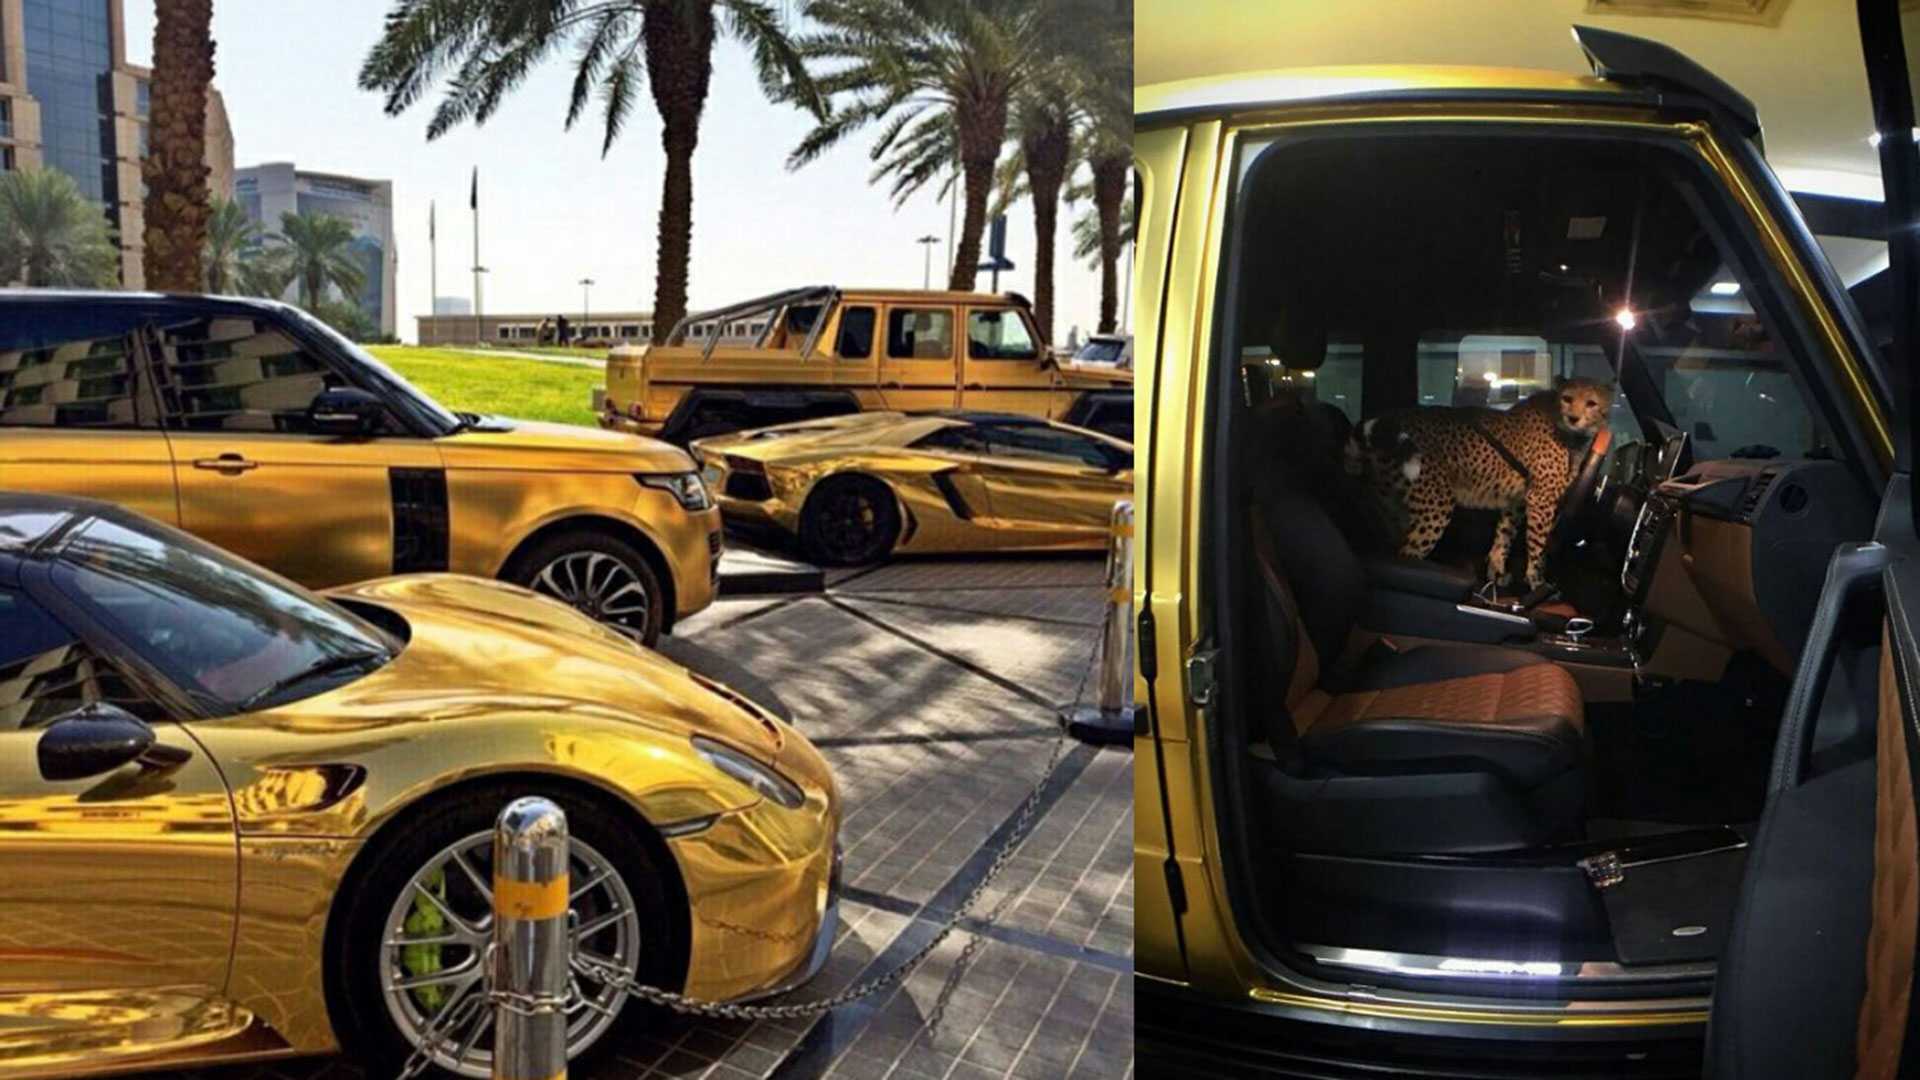 Arab Billionaire with gold supercars and pet cheetah